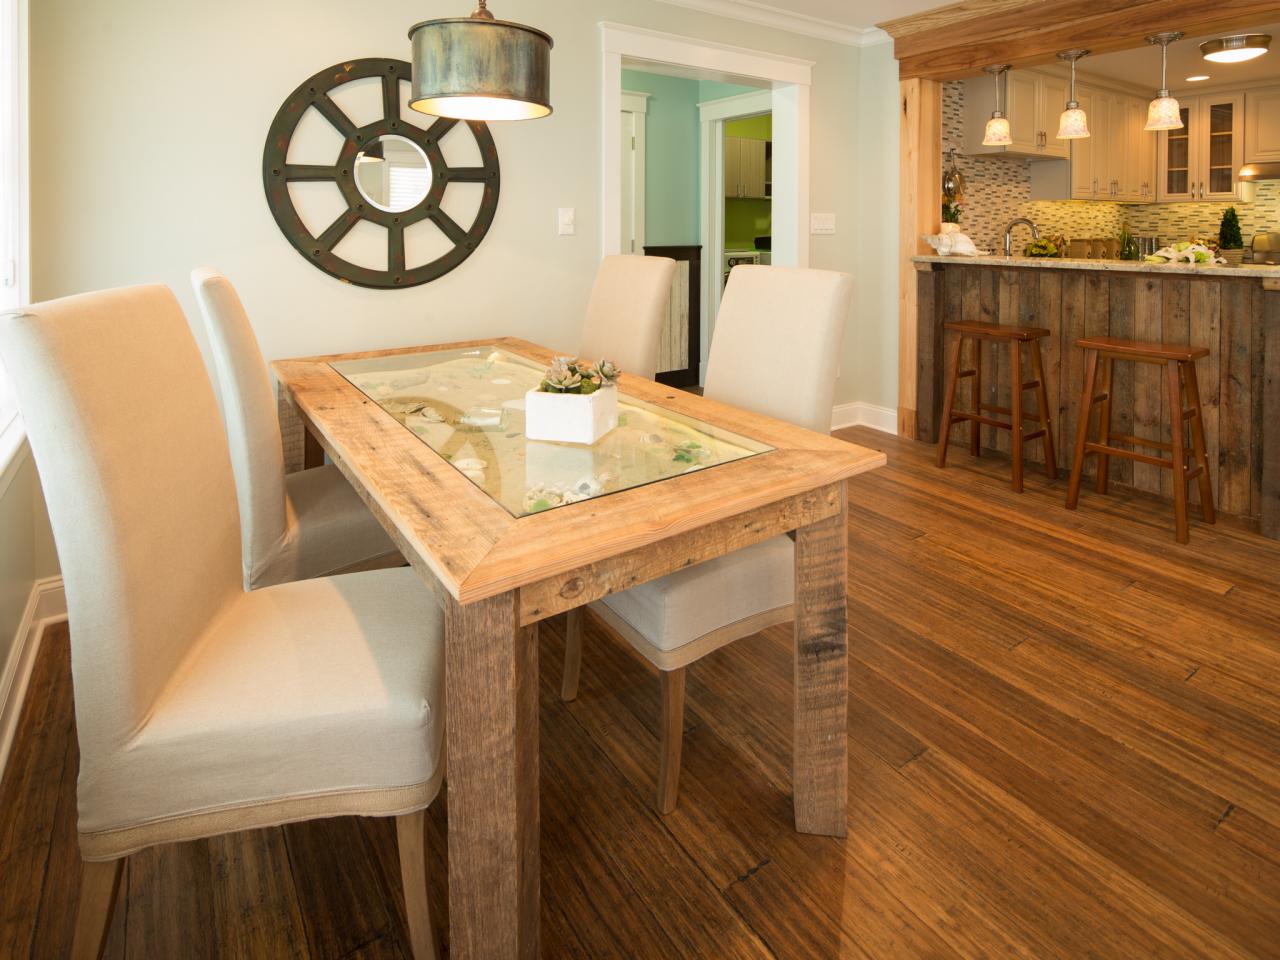 Build A Reclaimed Wood Dining Table, Reclaimed Wood Dining Table Lighting